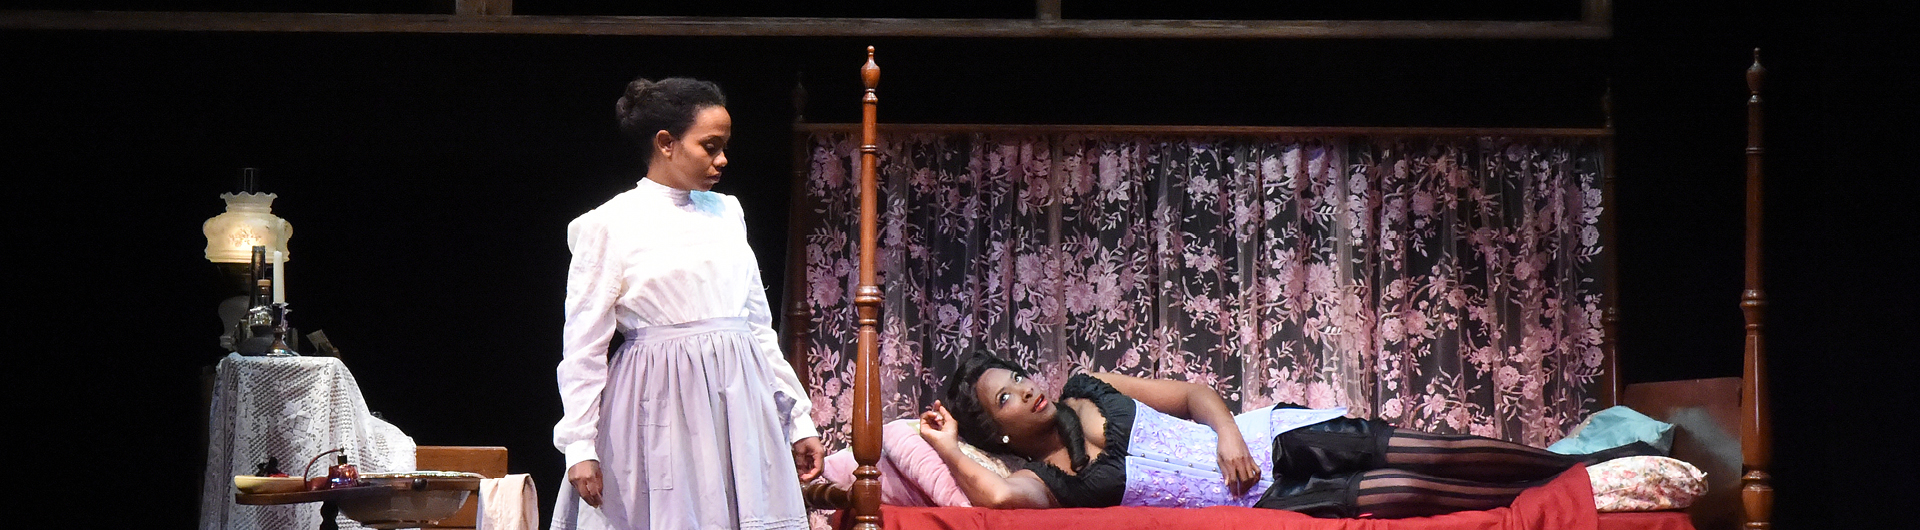 Lynn Nottage's 'Intimate Apparel' on stage in Tucson